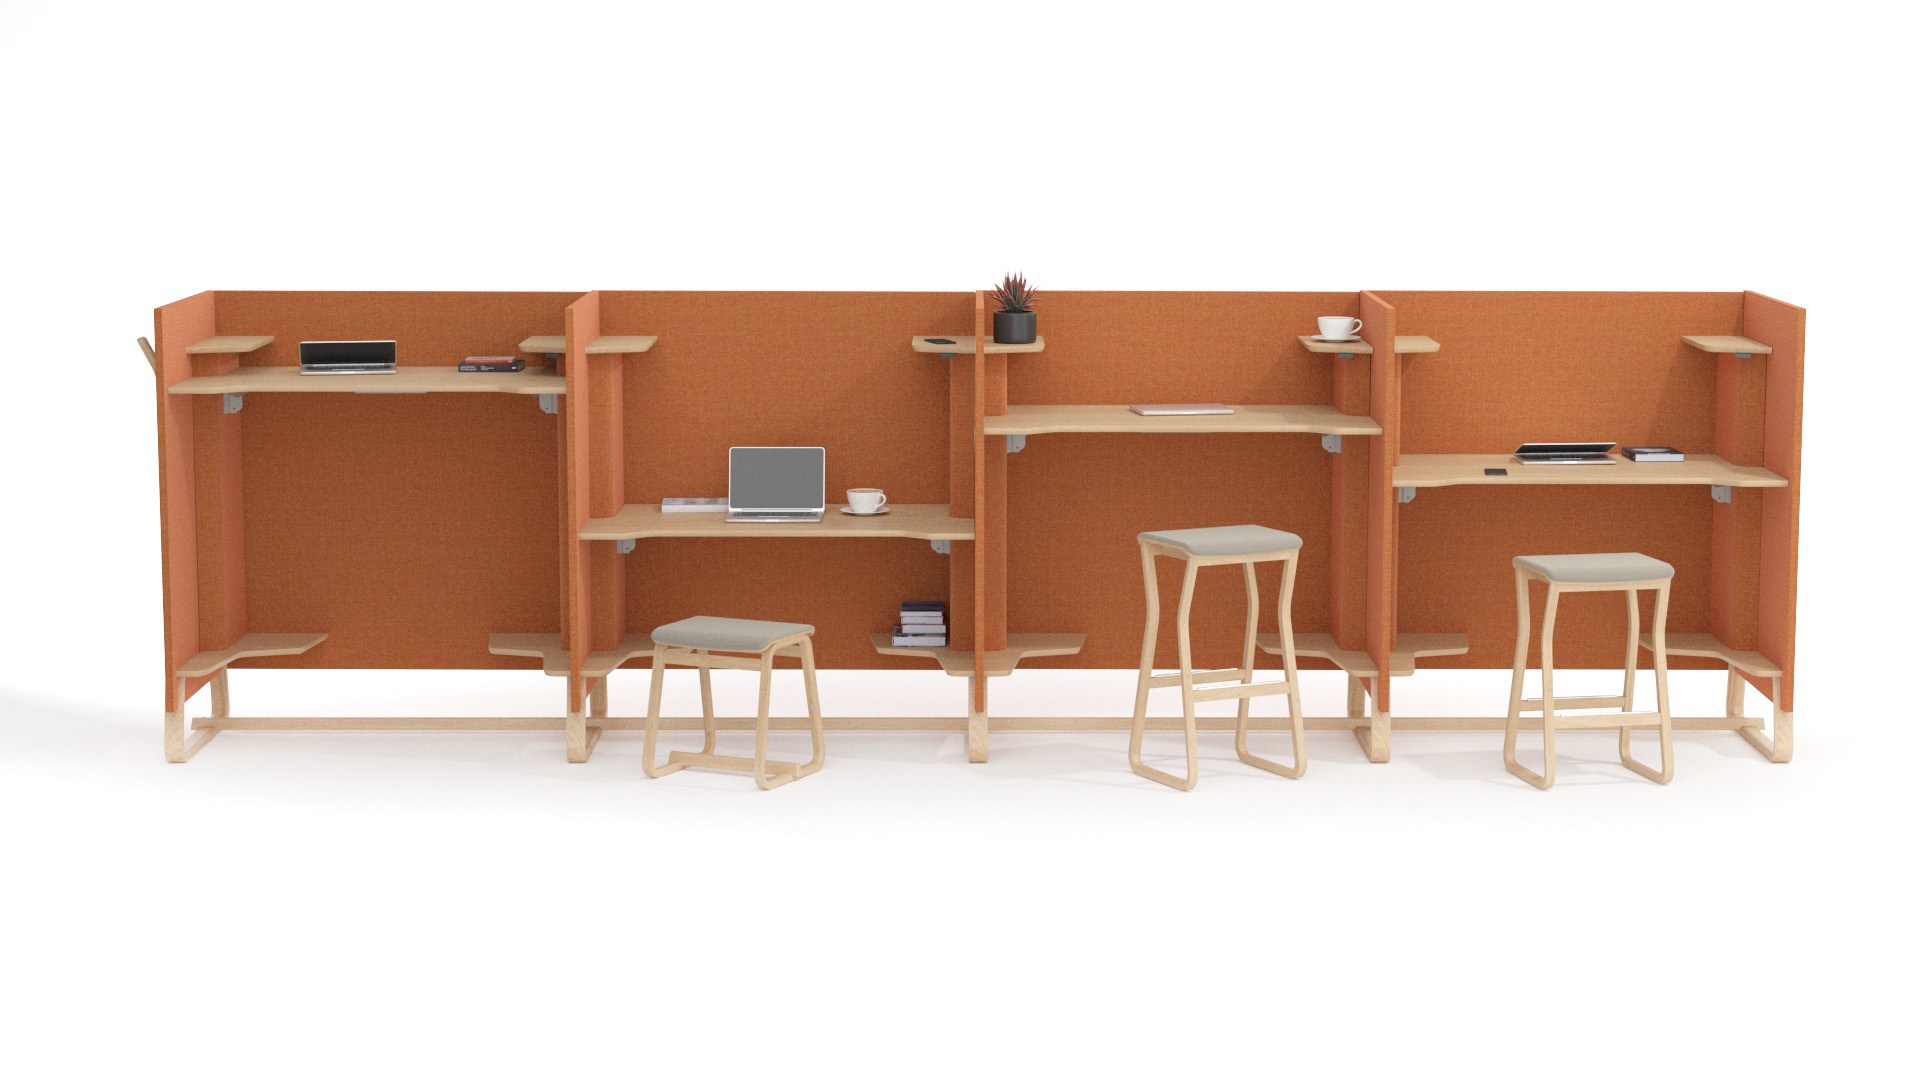 Row of height adjustable booths for an office includes standing desks and seated desks.